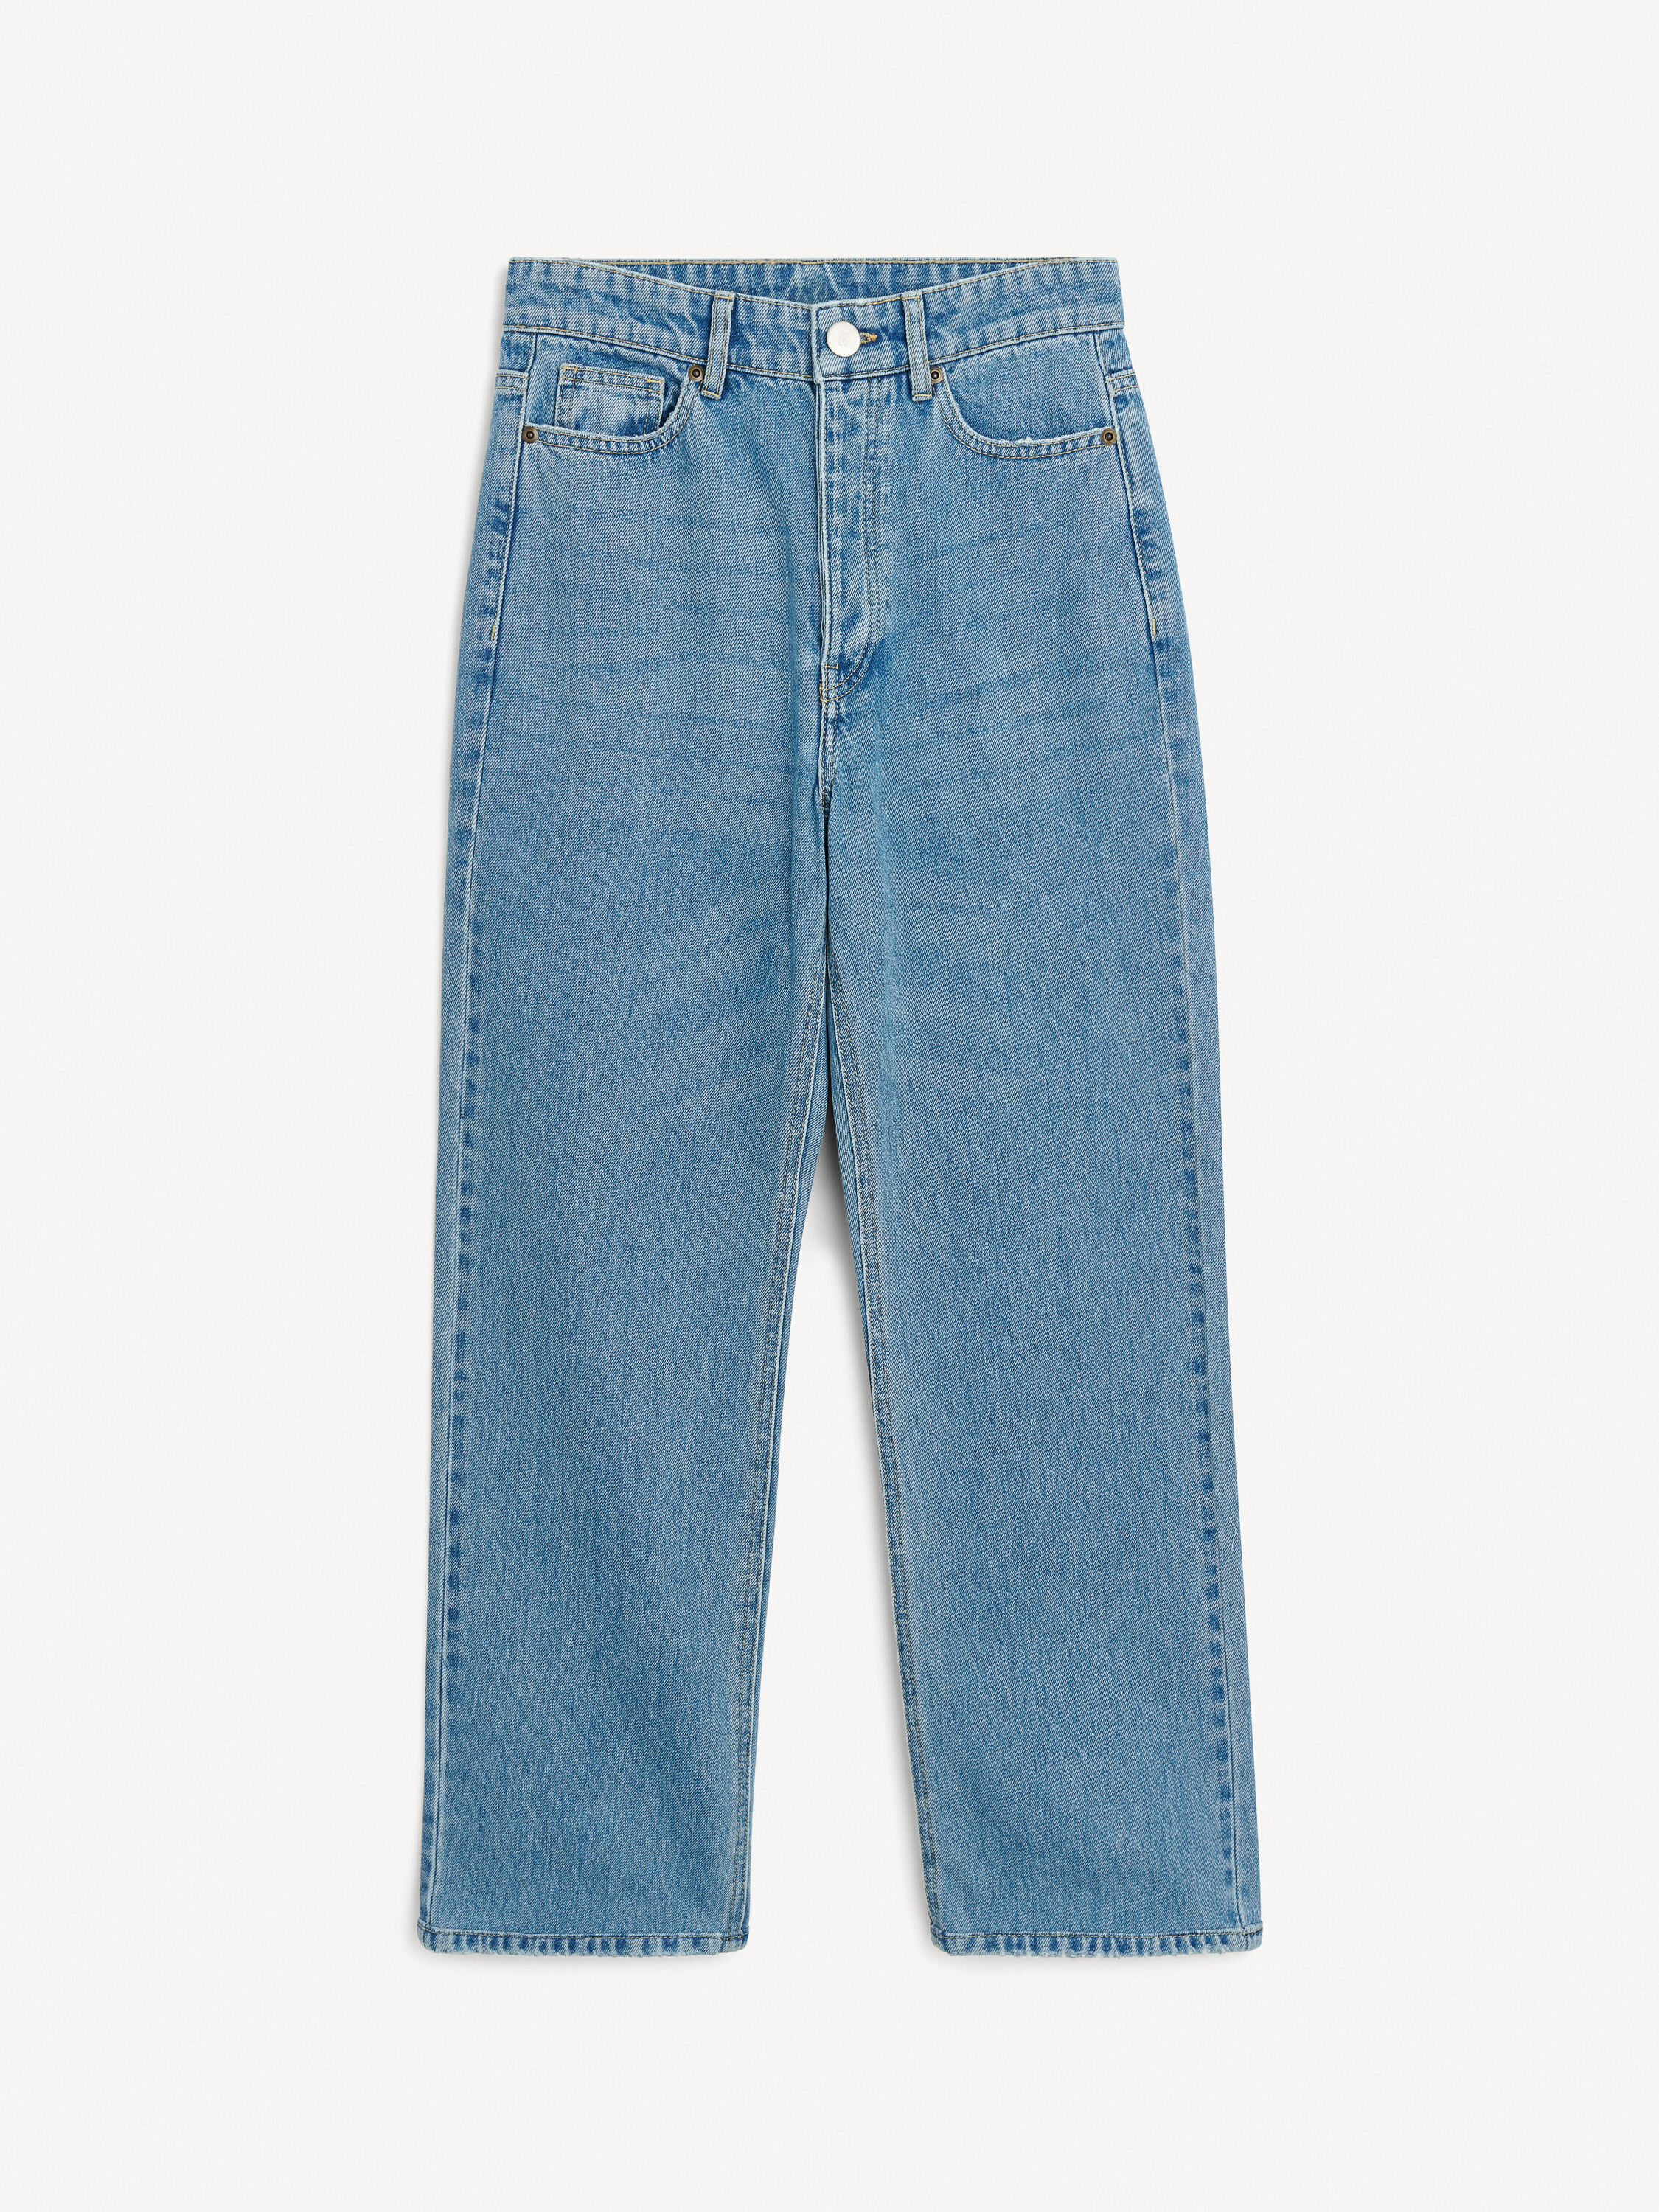 Cotton denim jeans pant, Gender : Mens, Feature : Anti-Shrink, Eco-Friendly  at Rs 450 / Piece in Bellary